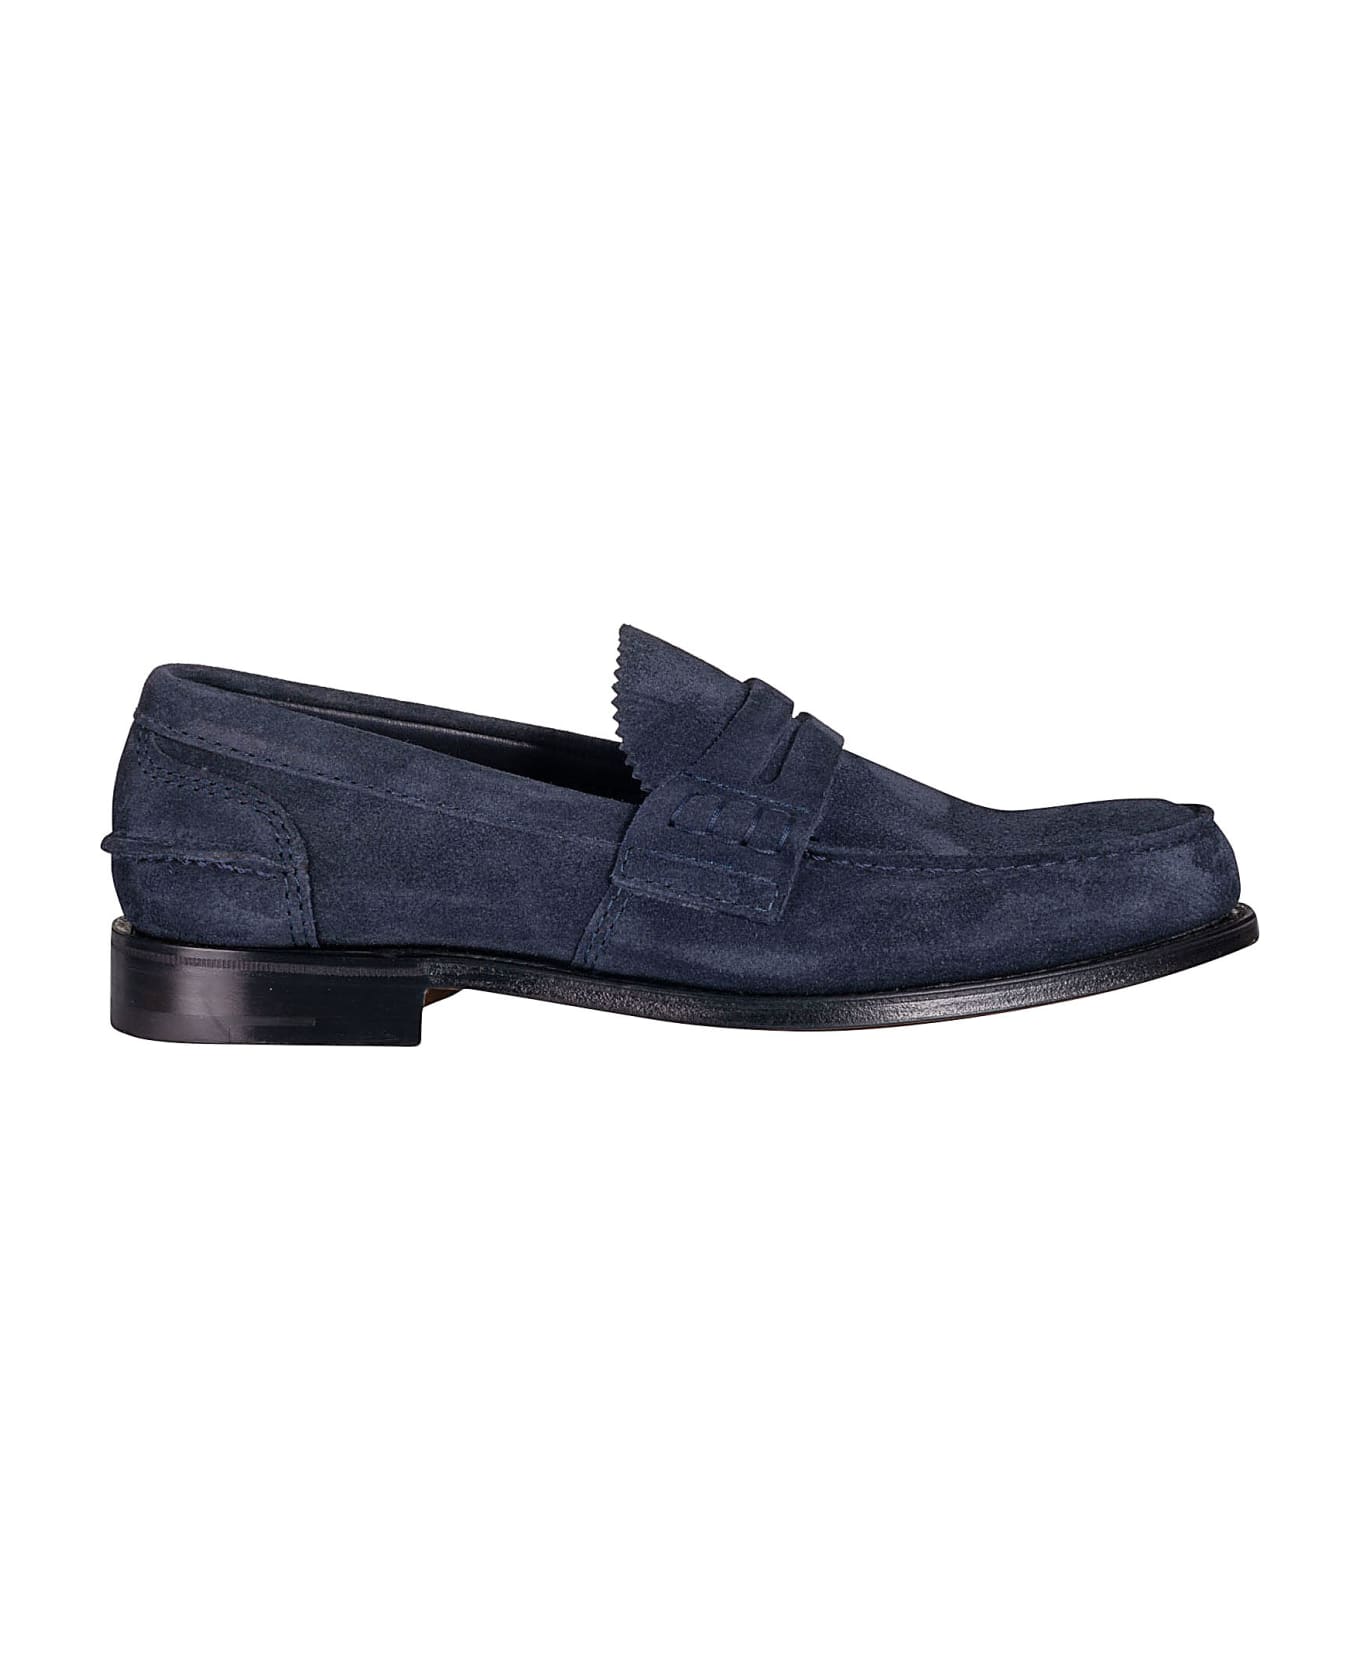 Church's Classic Loafers - Blue ローファー＆デッキシューズ